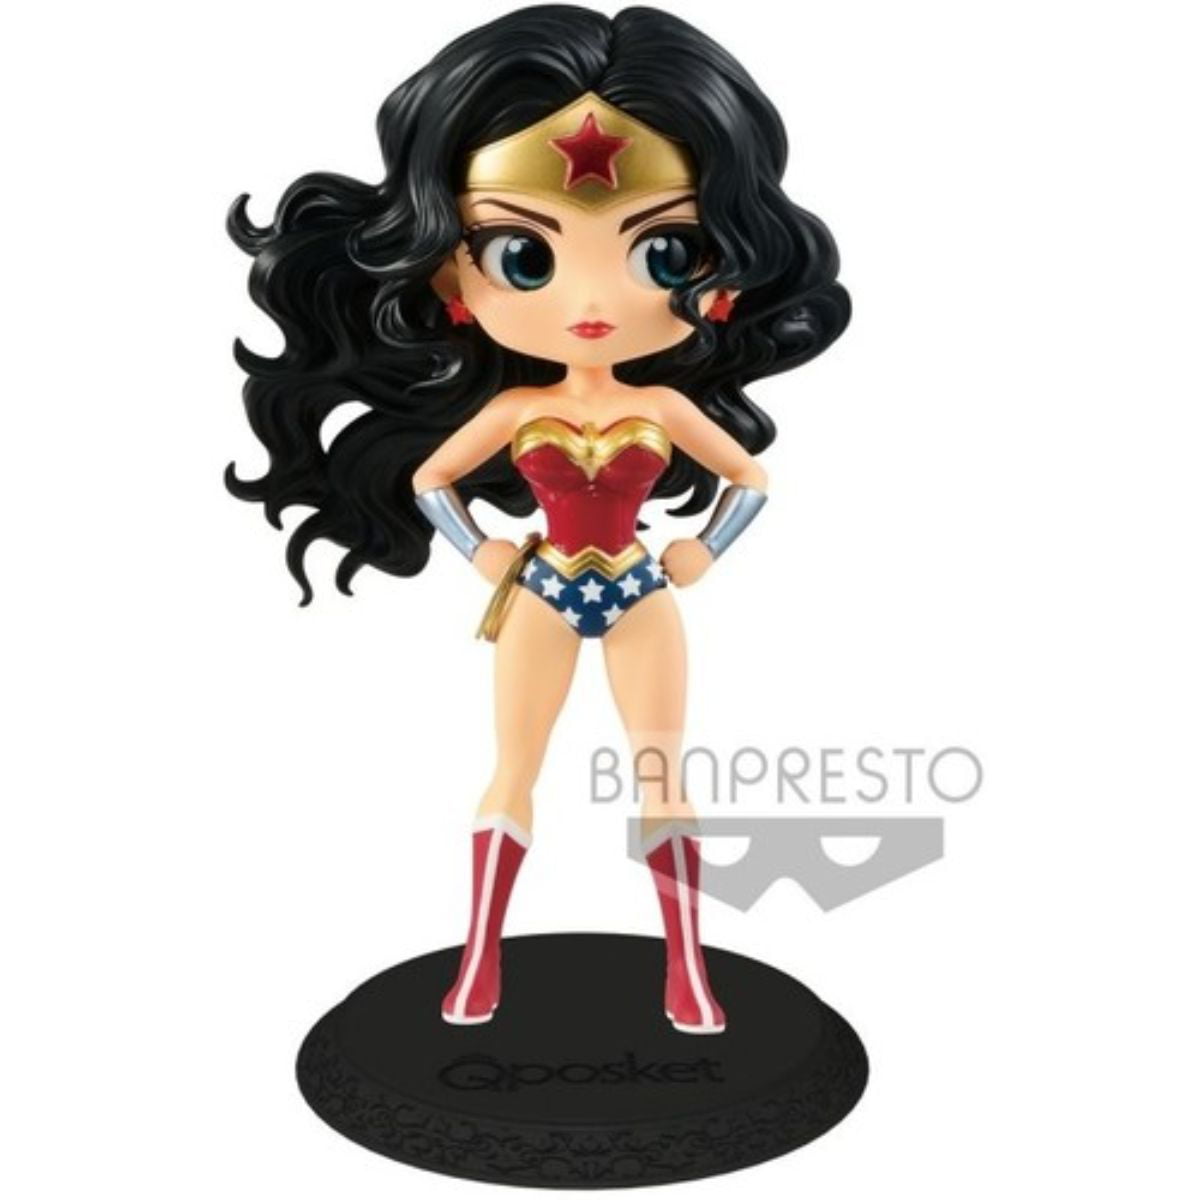 Wonder Woman Q Posket Characters Q Version Action Figure Collectible Model Toy